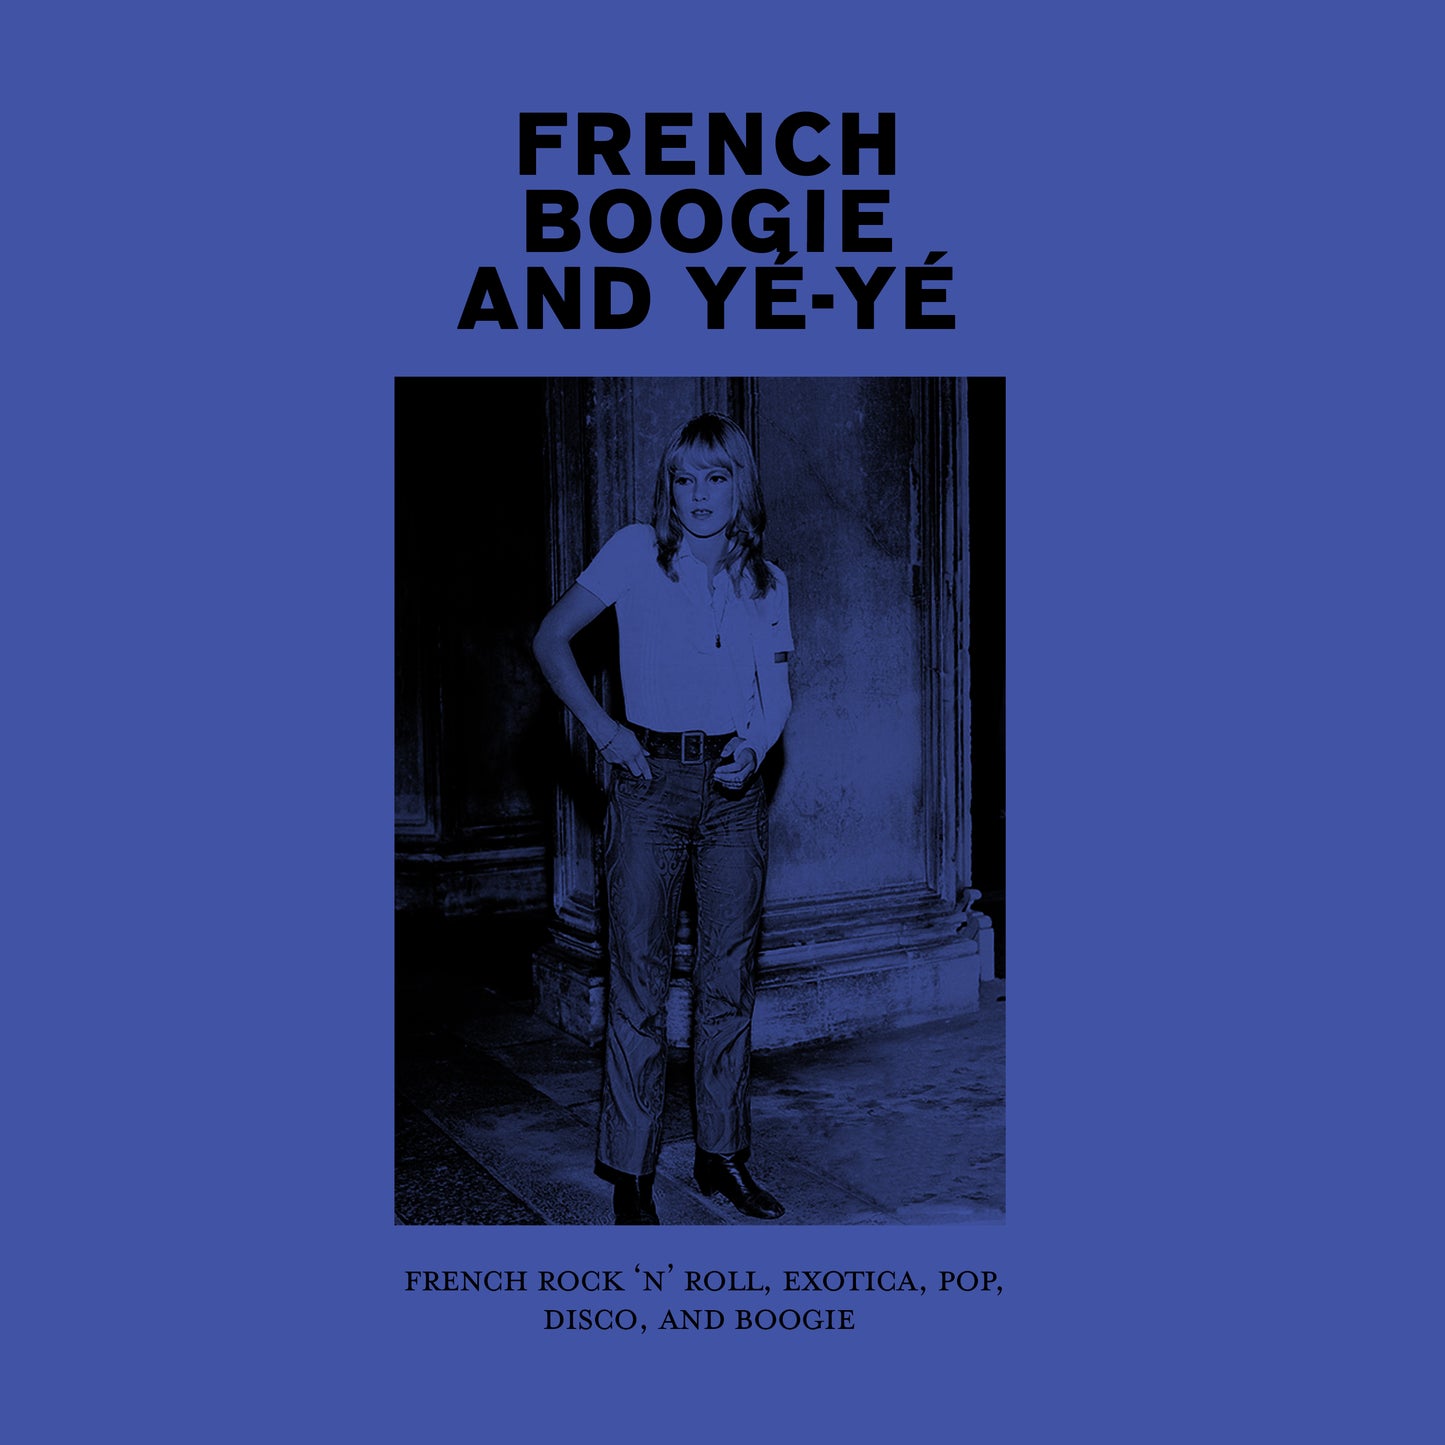 French Boogie and Yé-Yé (Cassette)